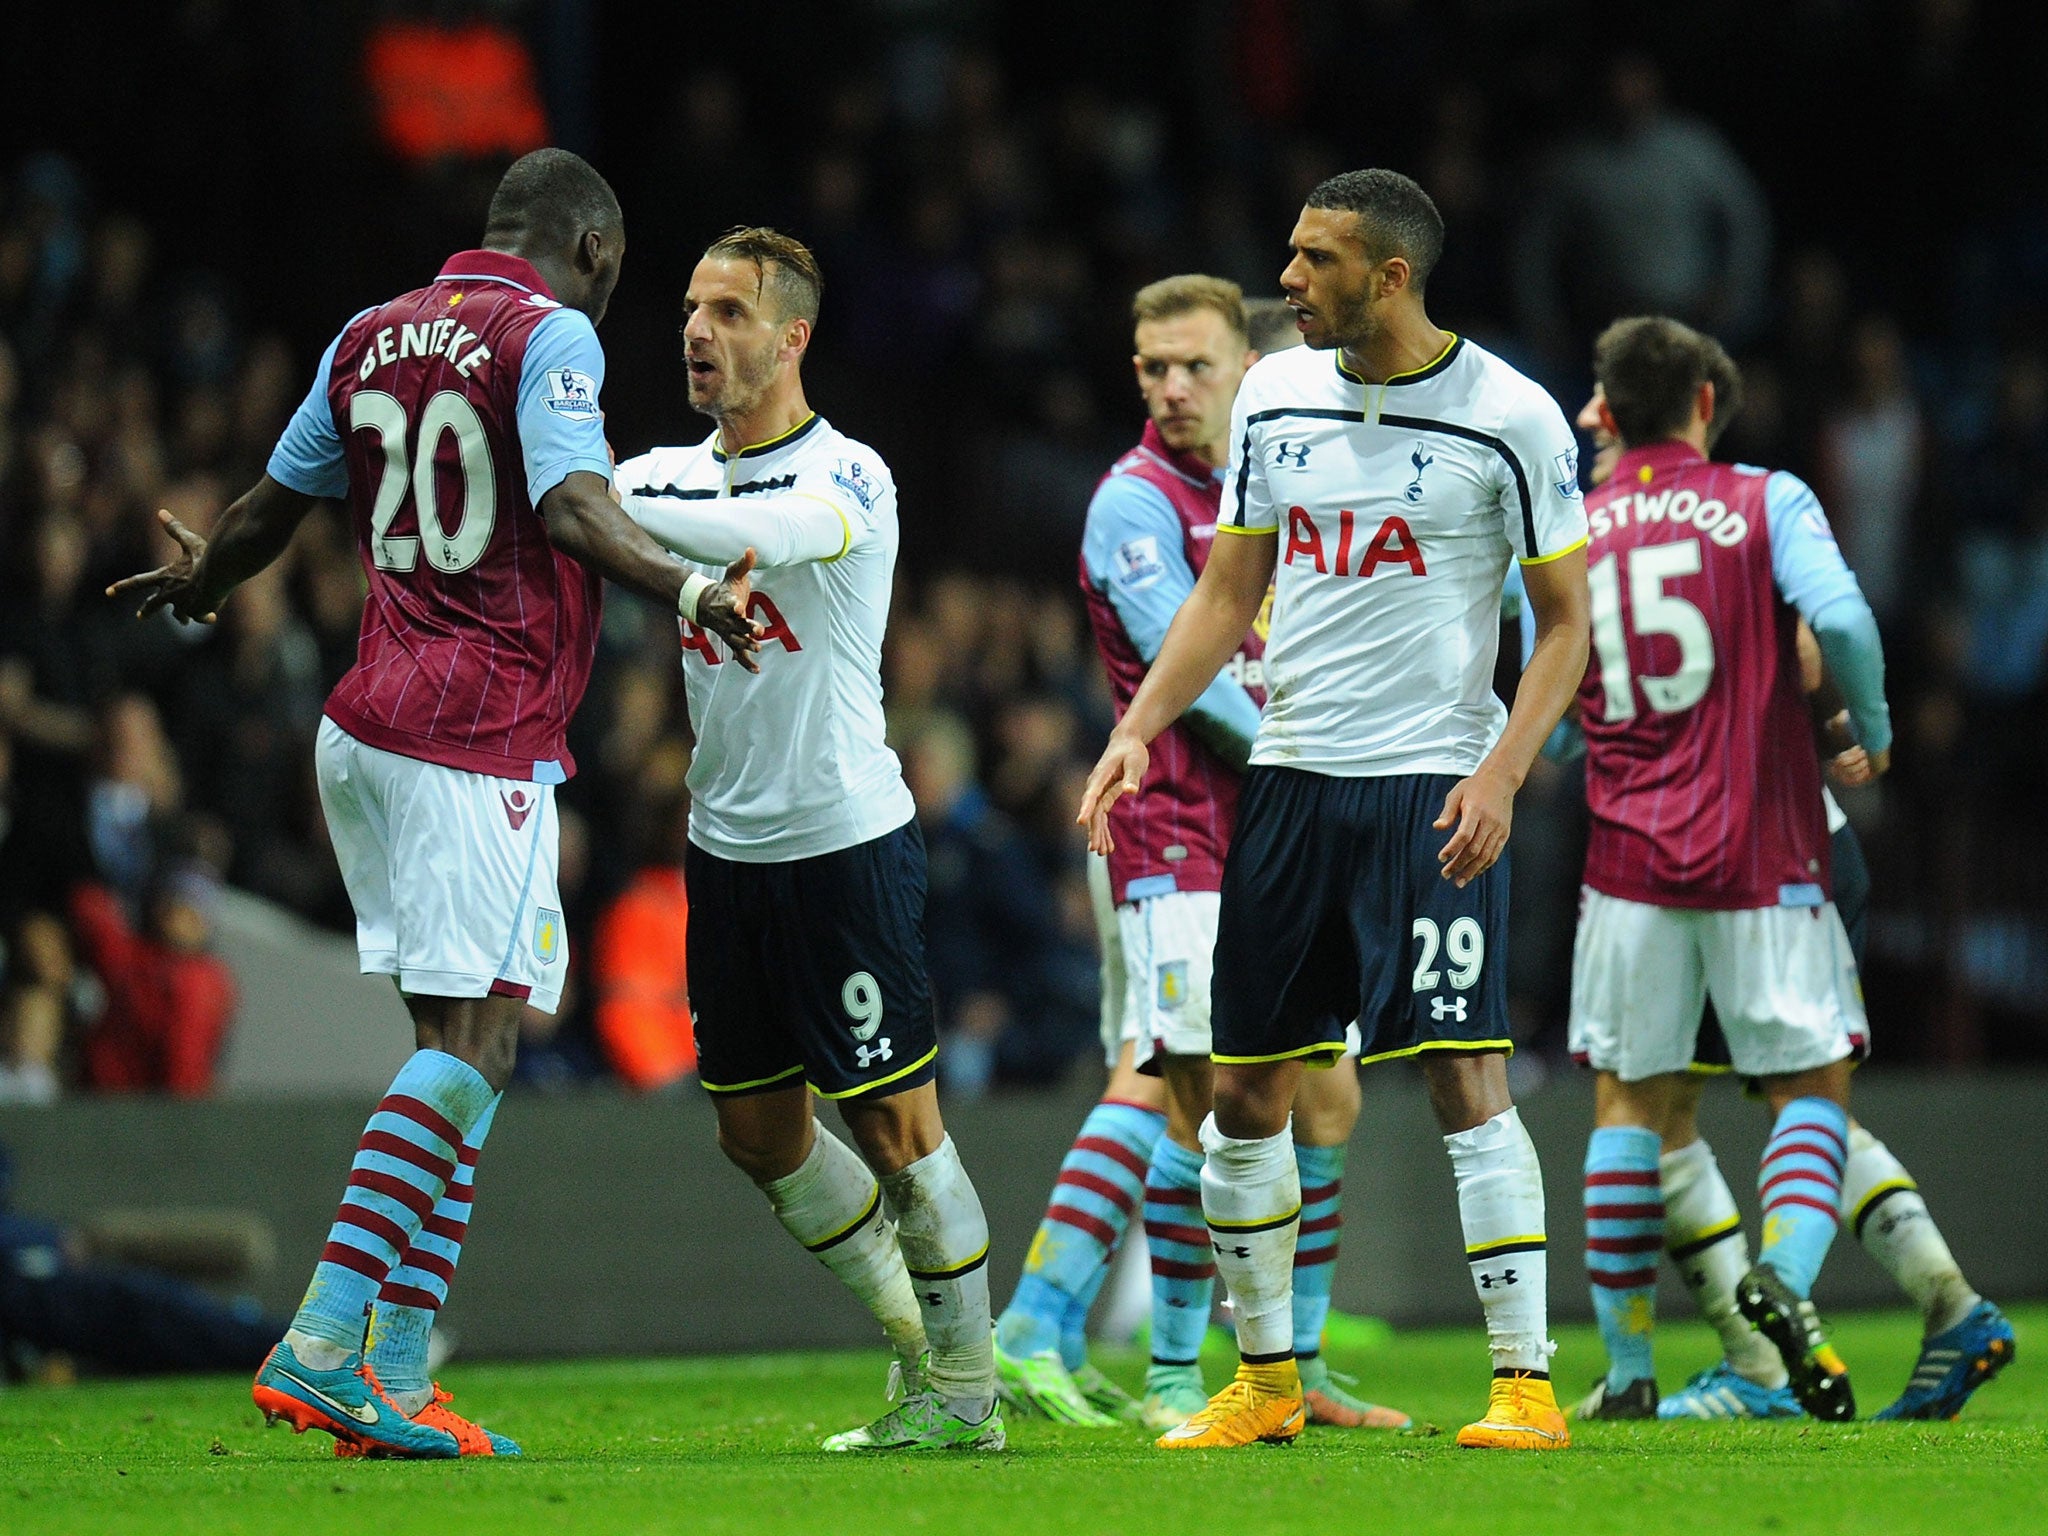 Christian Benteke is pushed by Roberto Soldado moments before he receives a red card